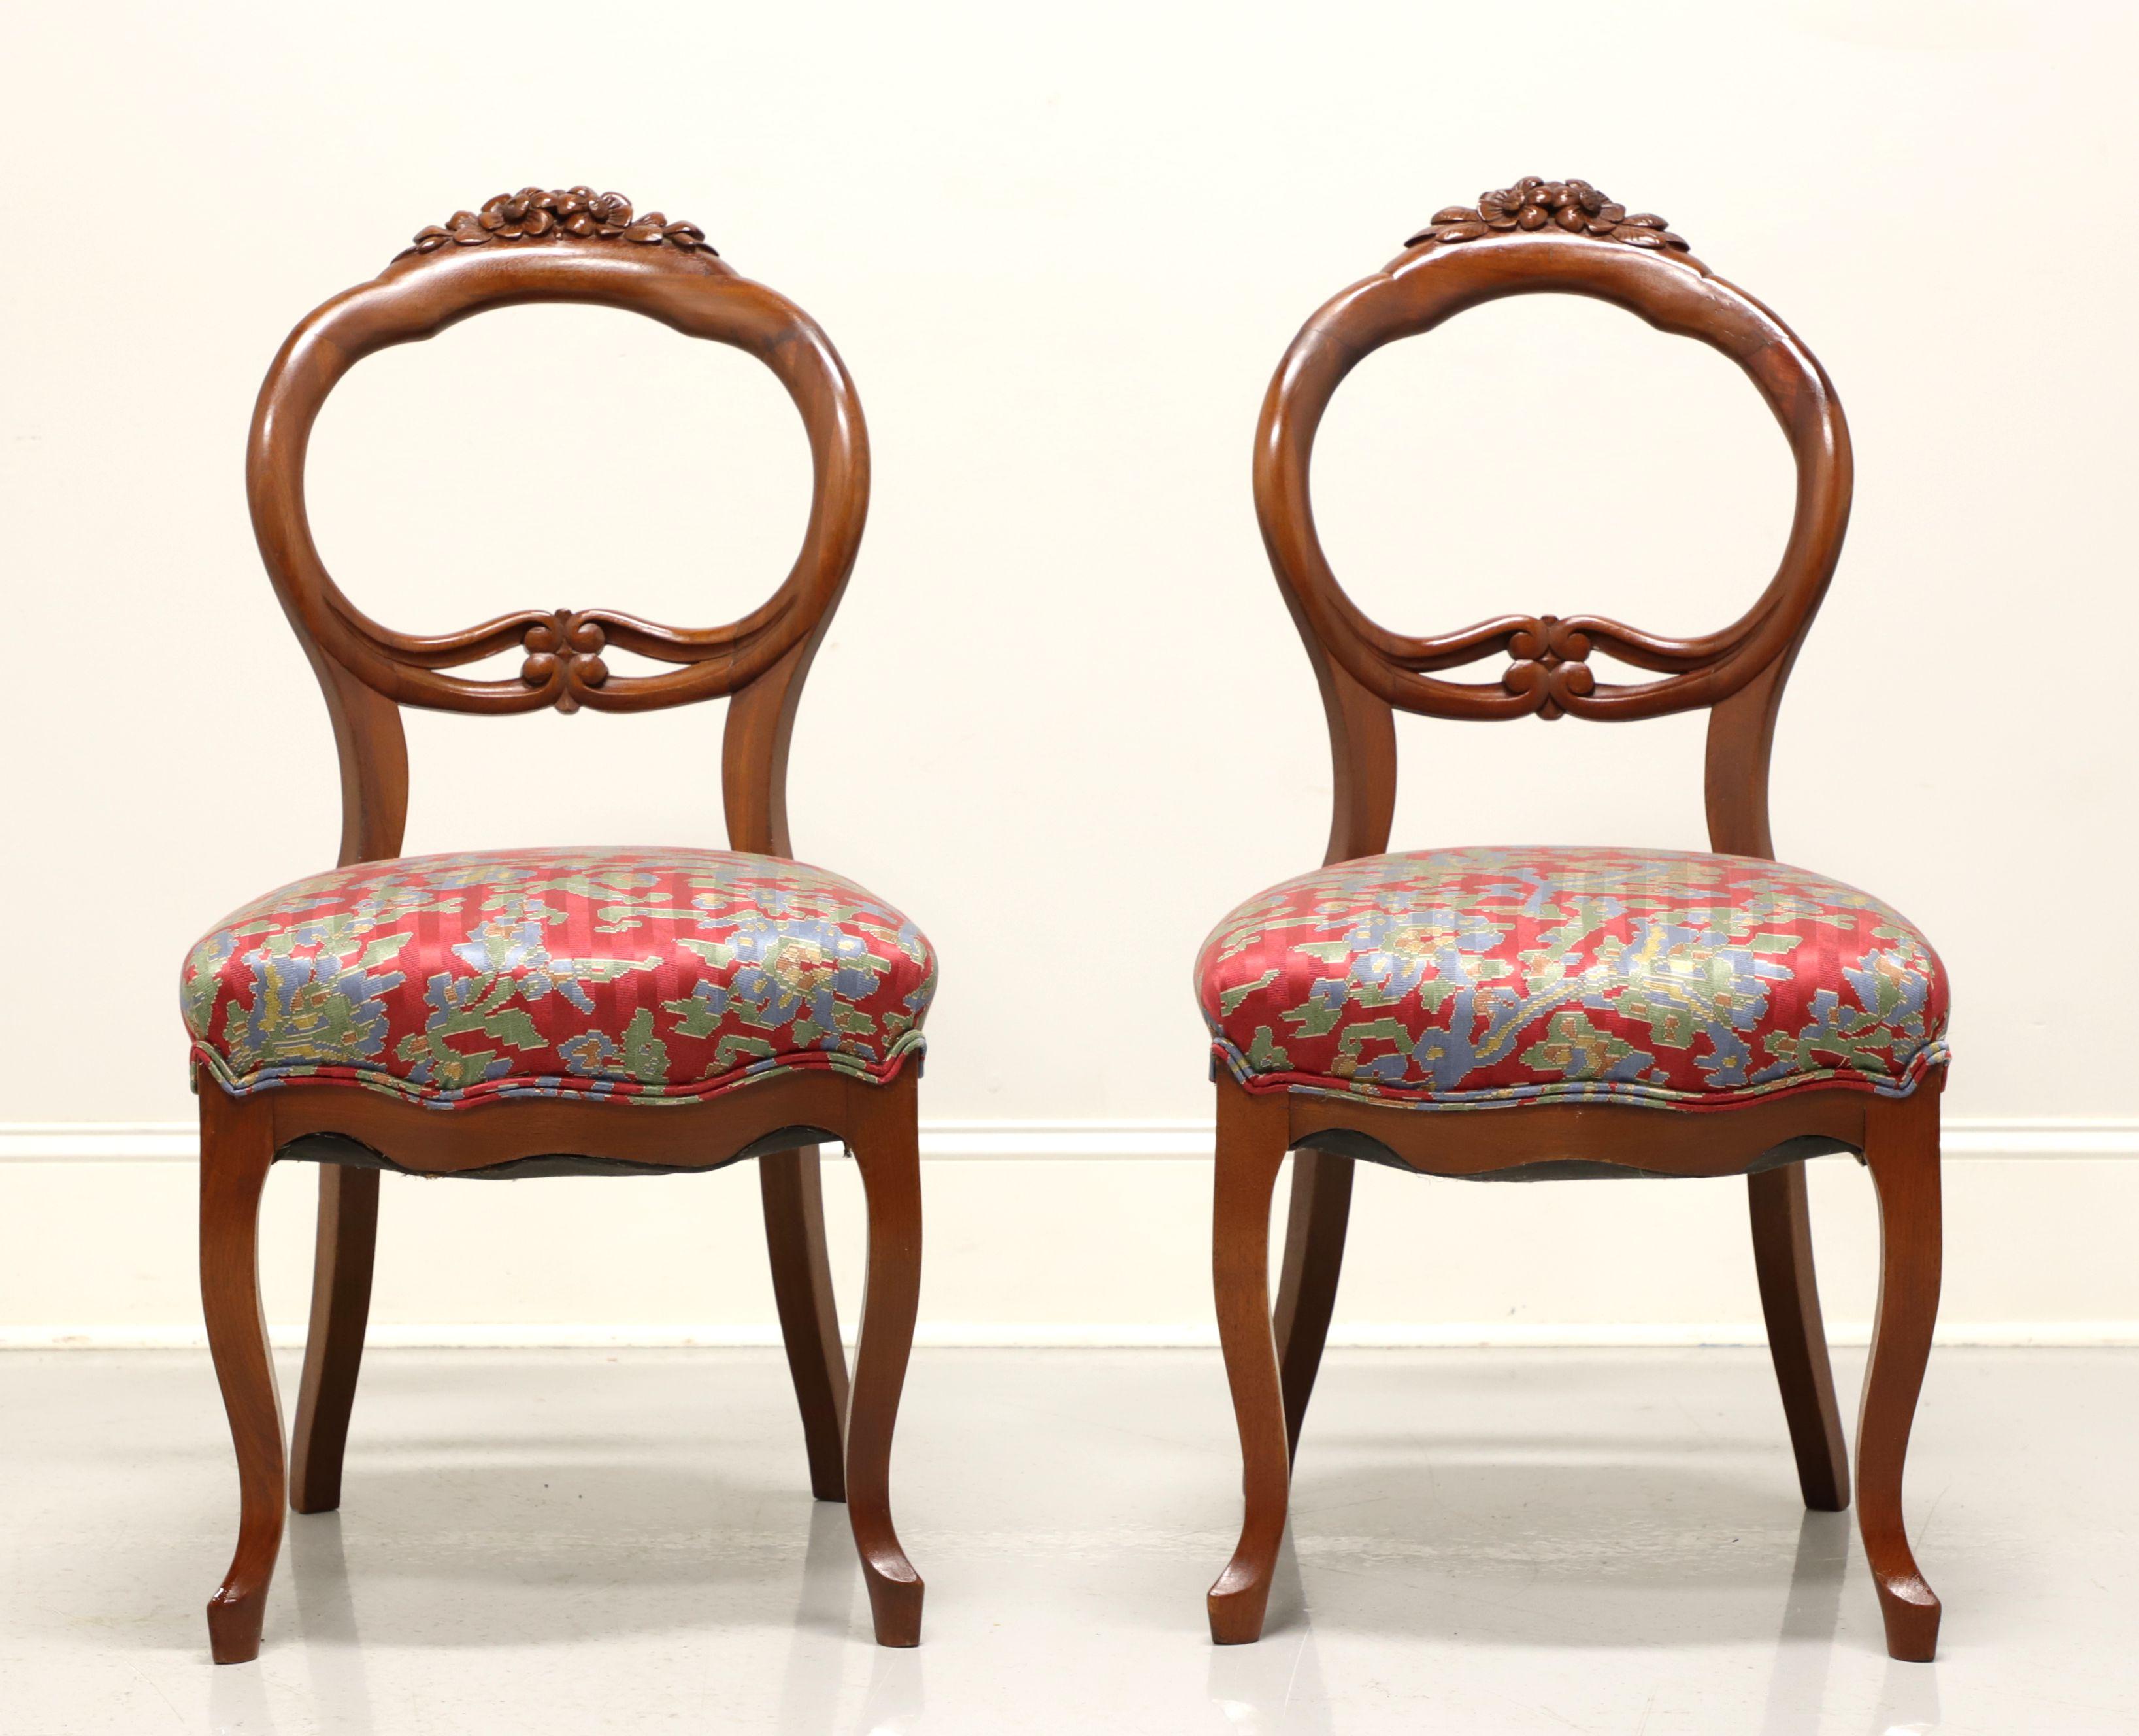 American Antique Early 20th Century Walnut Victorian Balloon Back Side Chairs - Pair For Sale